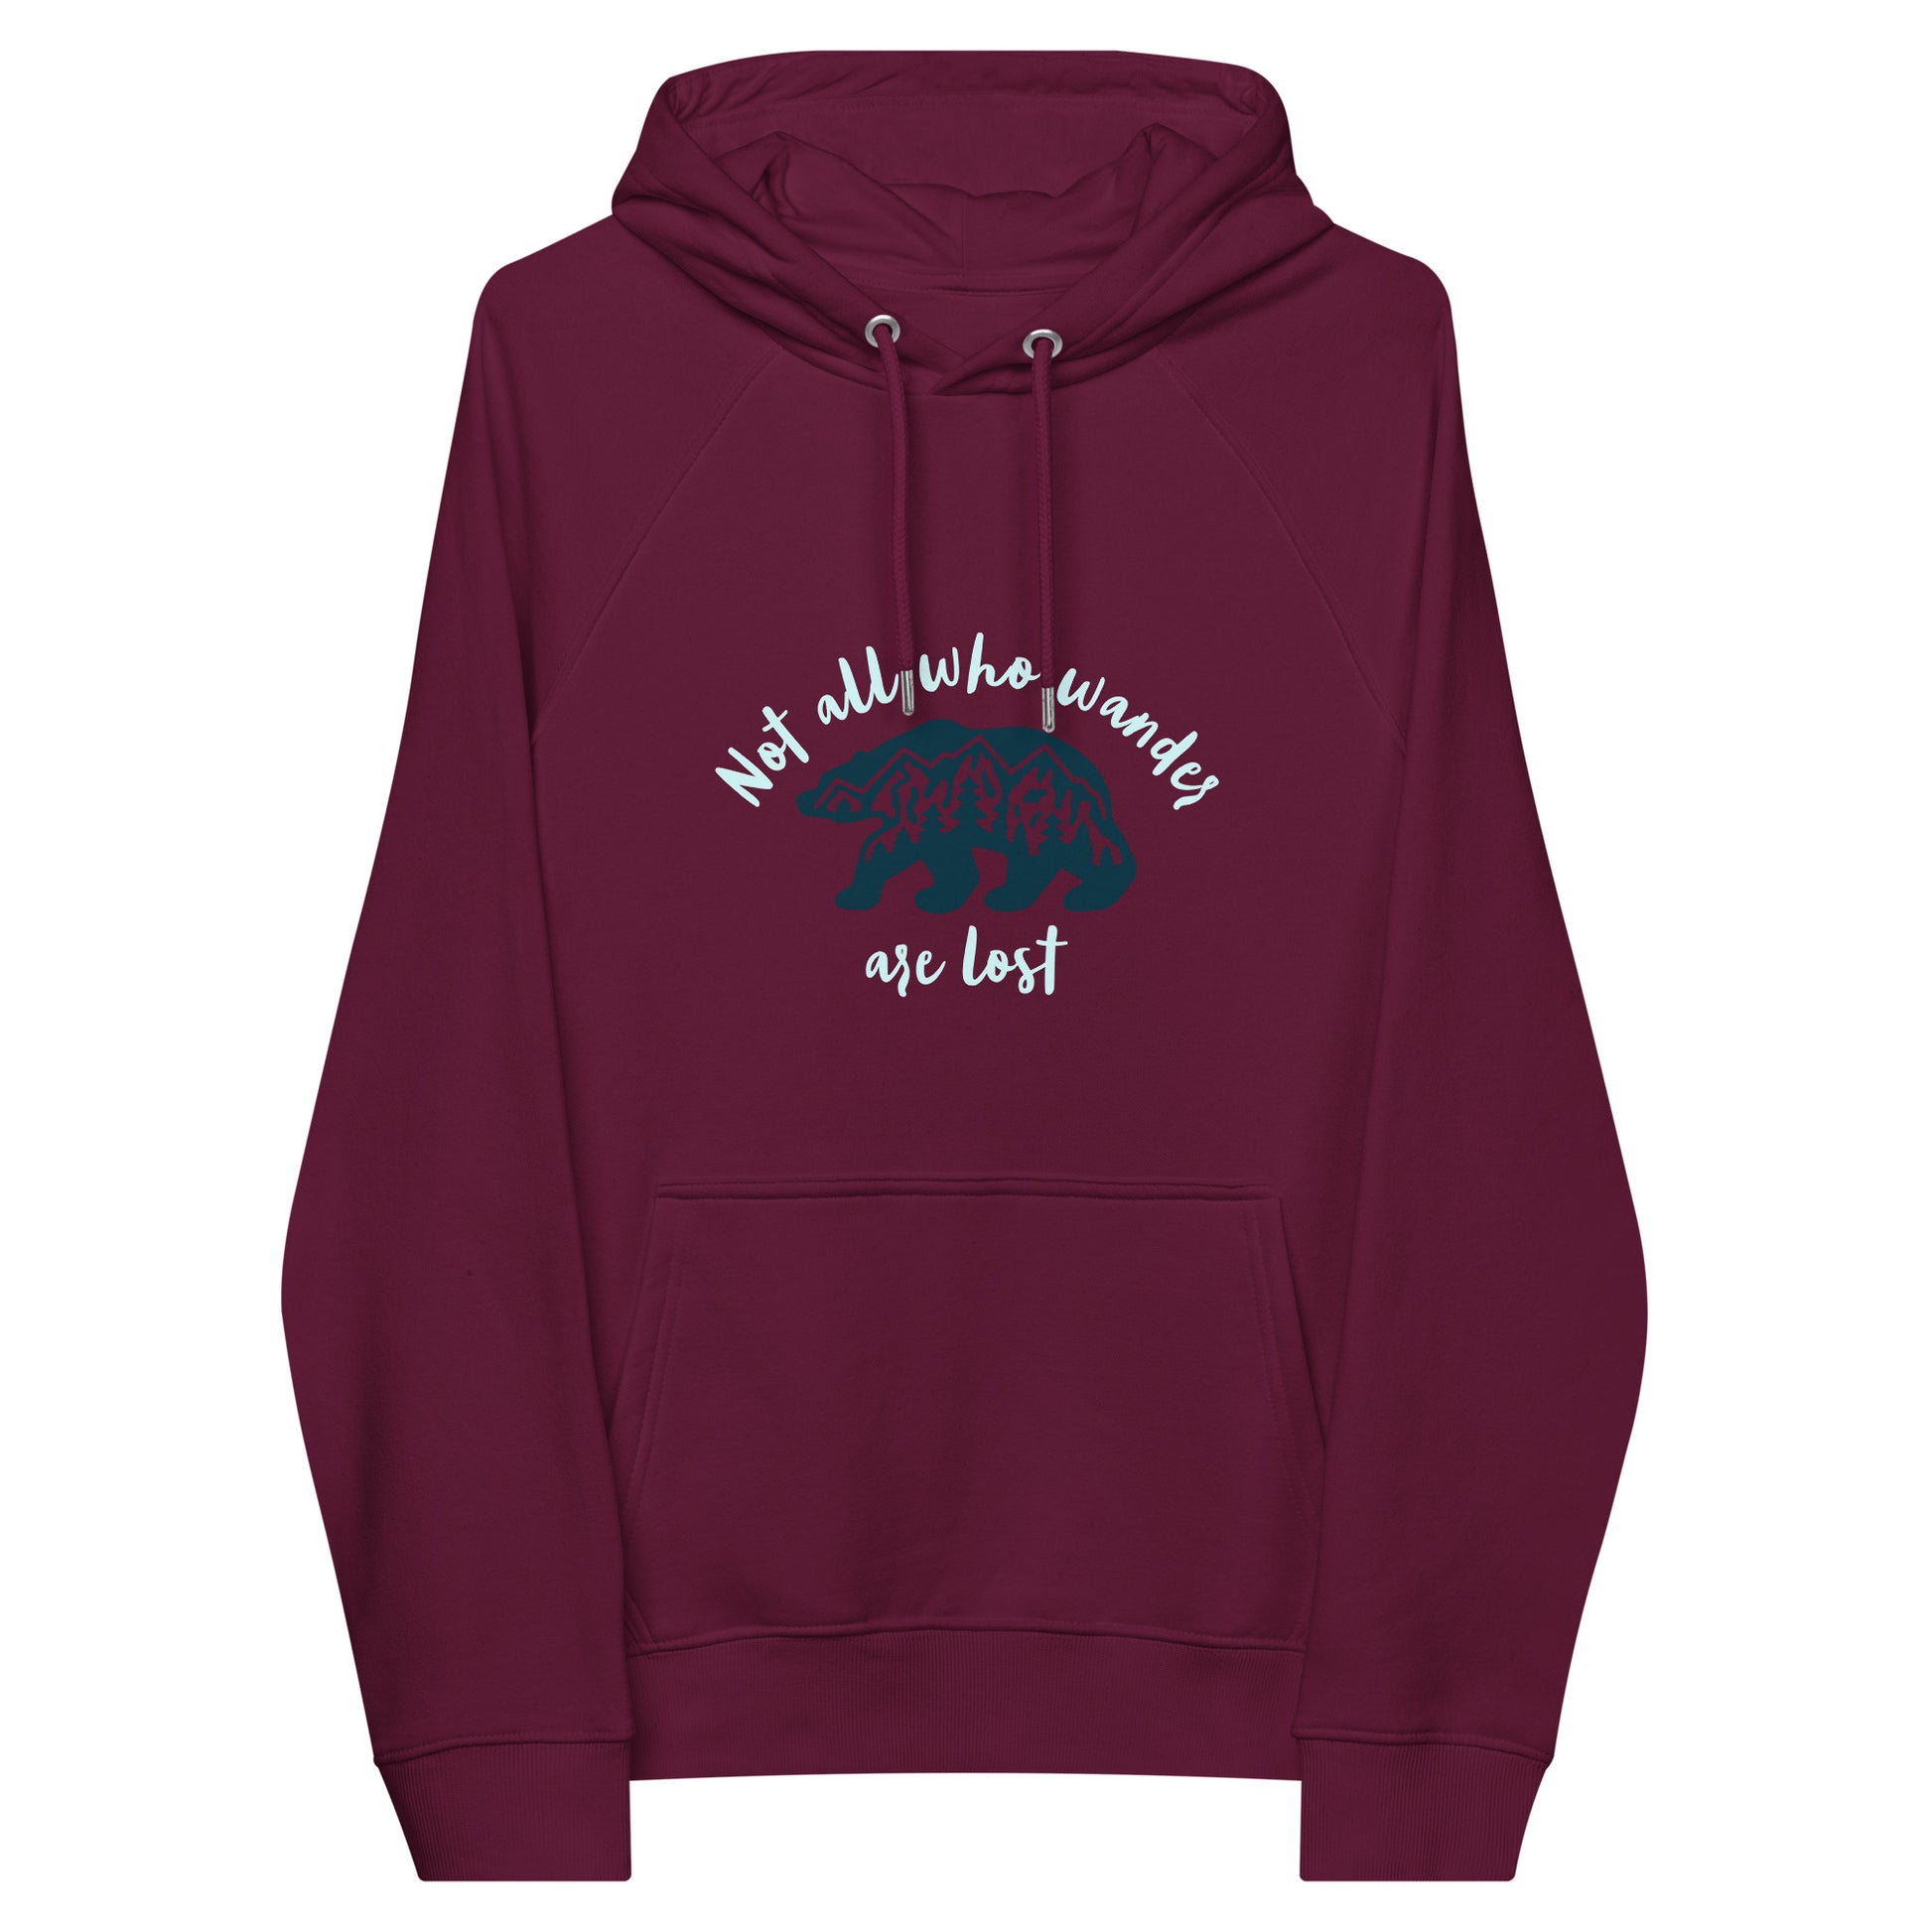 Not All Who Wander Are Lost eco raglan hoodie